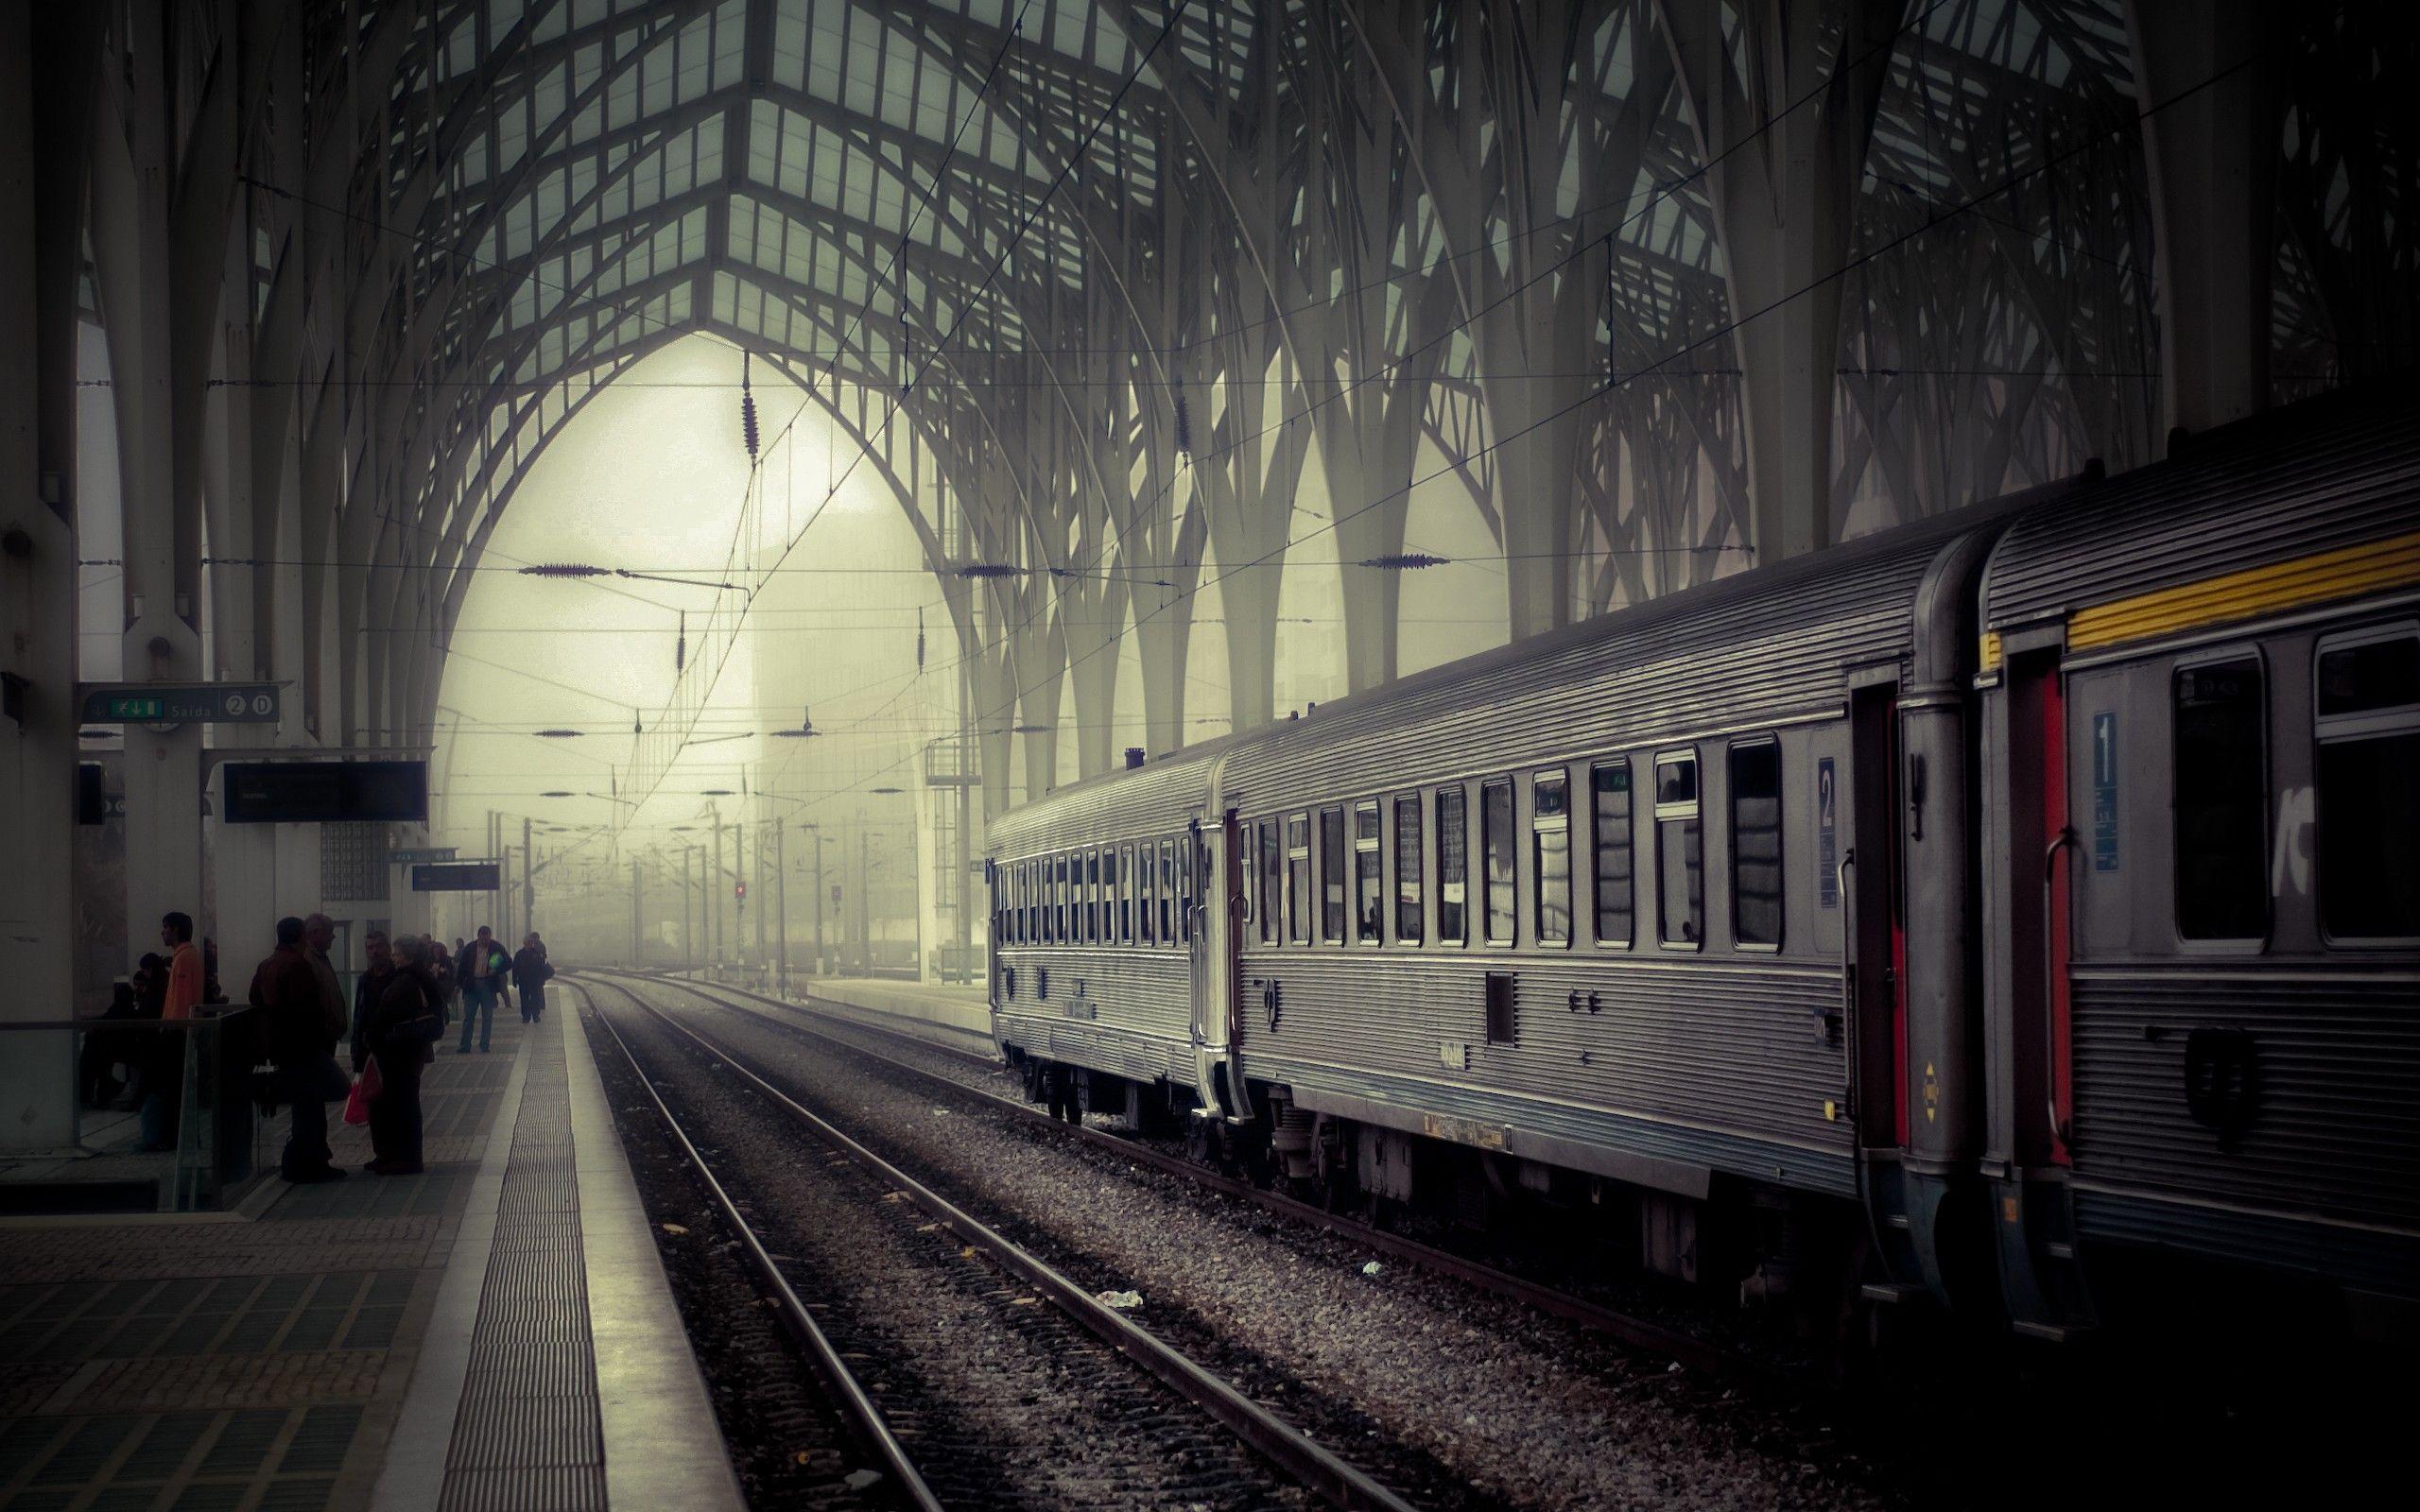 Download Train Station Wallpaper Background 49177 2560x1600 px High